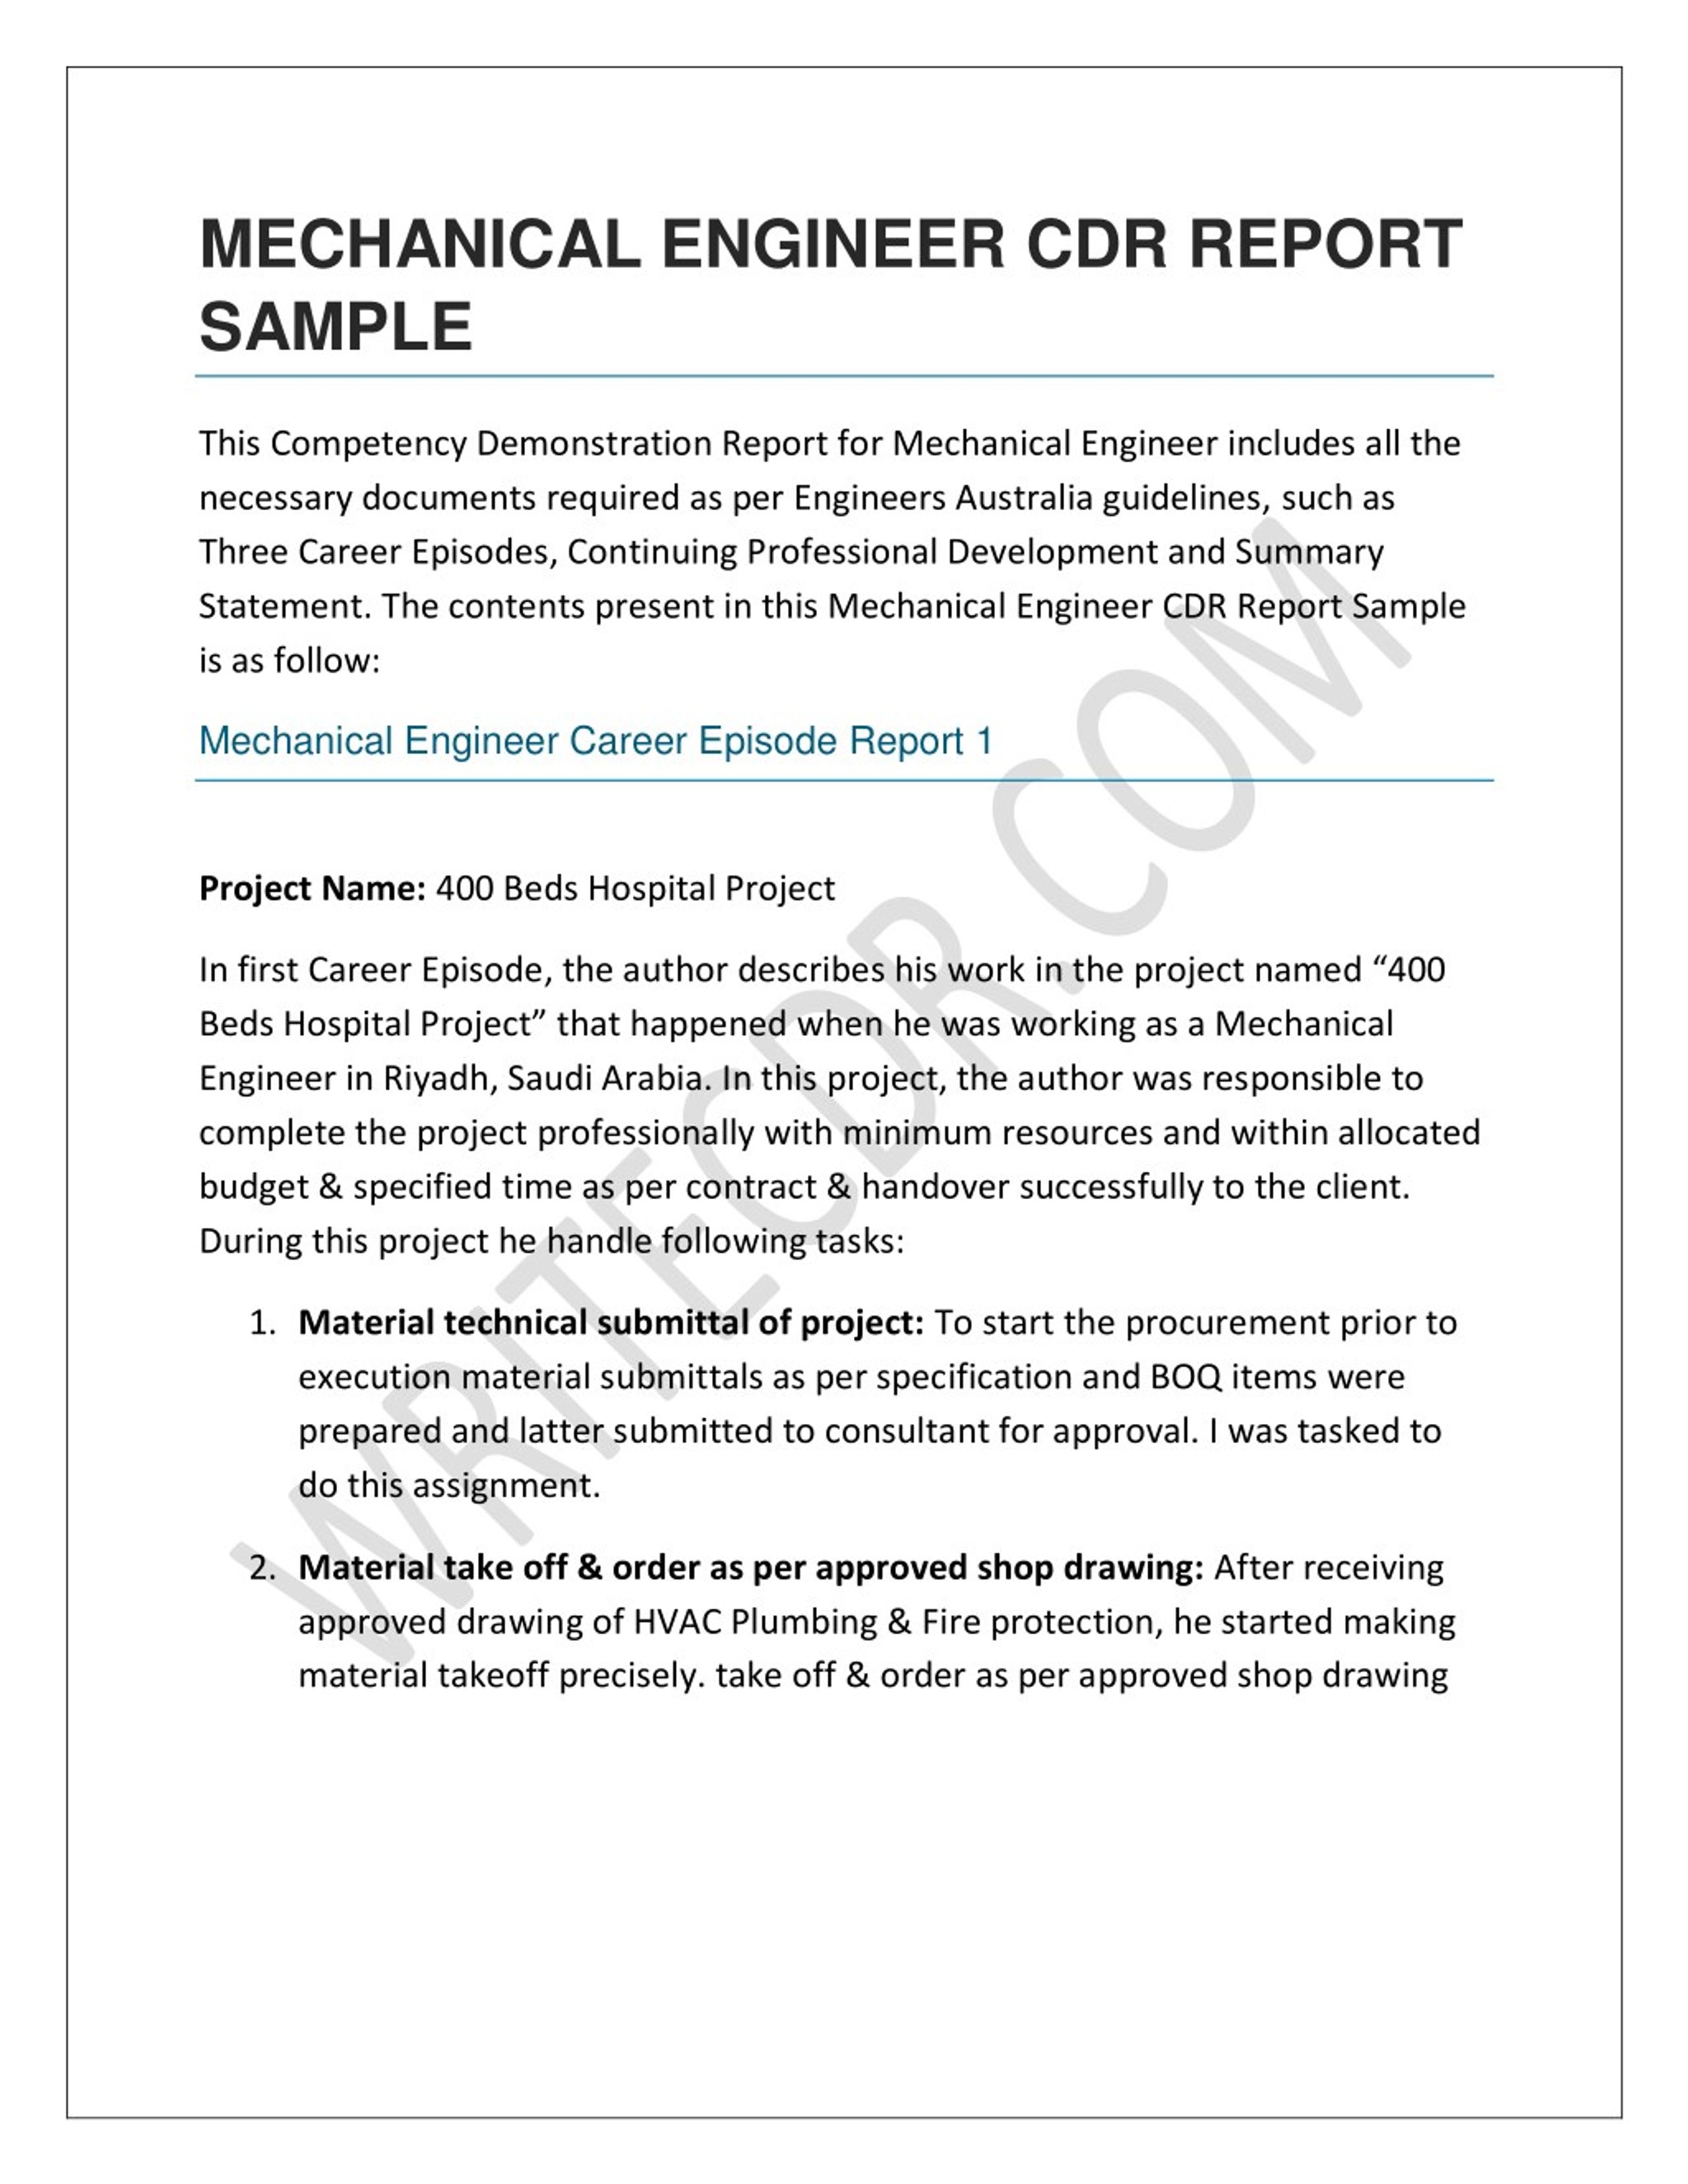 research report on mechanical engineering